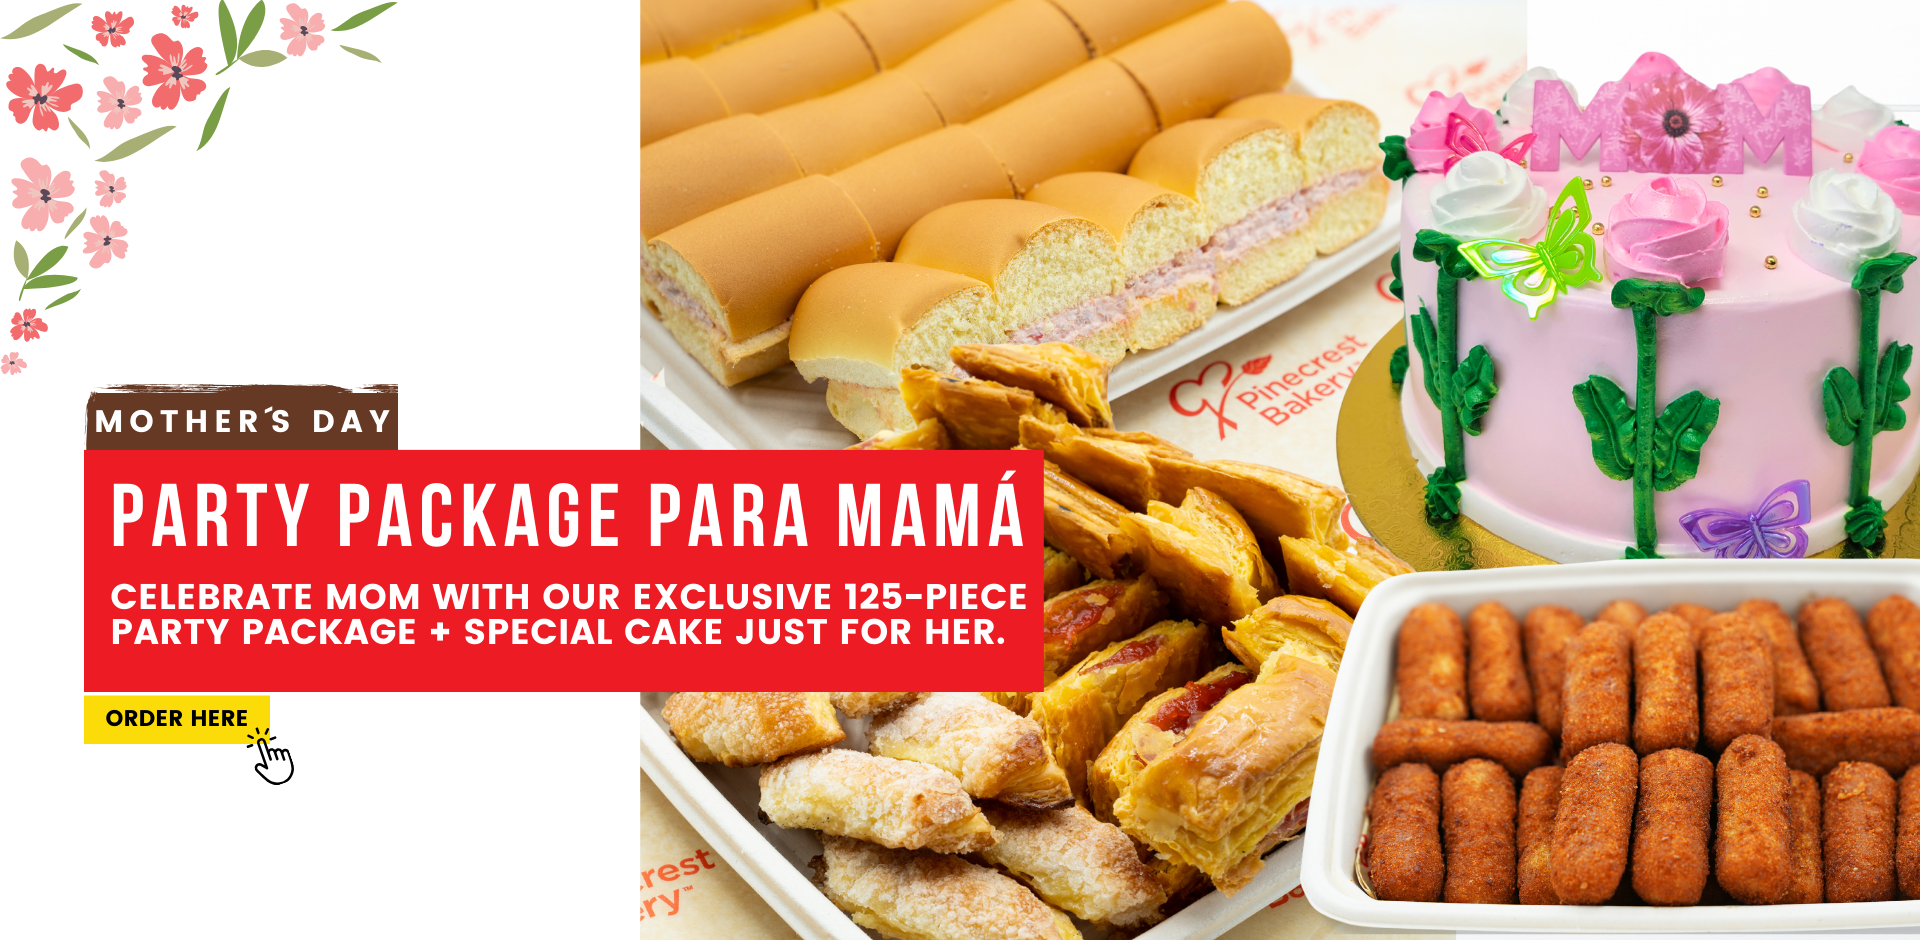 Mother's Day. Party package para mamá. Celebrate Mom with our exclusive 125-piece party package + special cake just for her. Order Here.